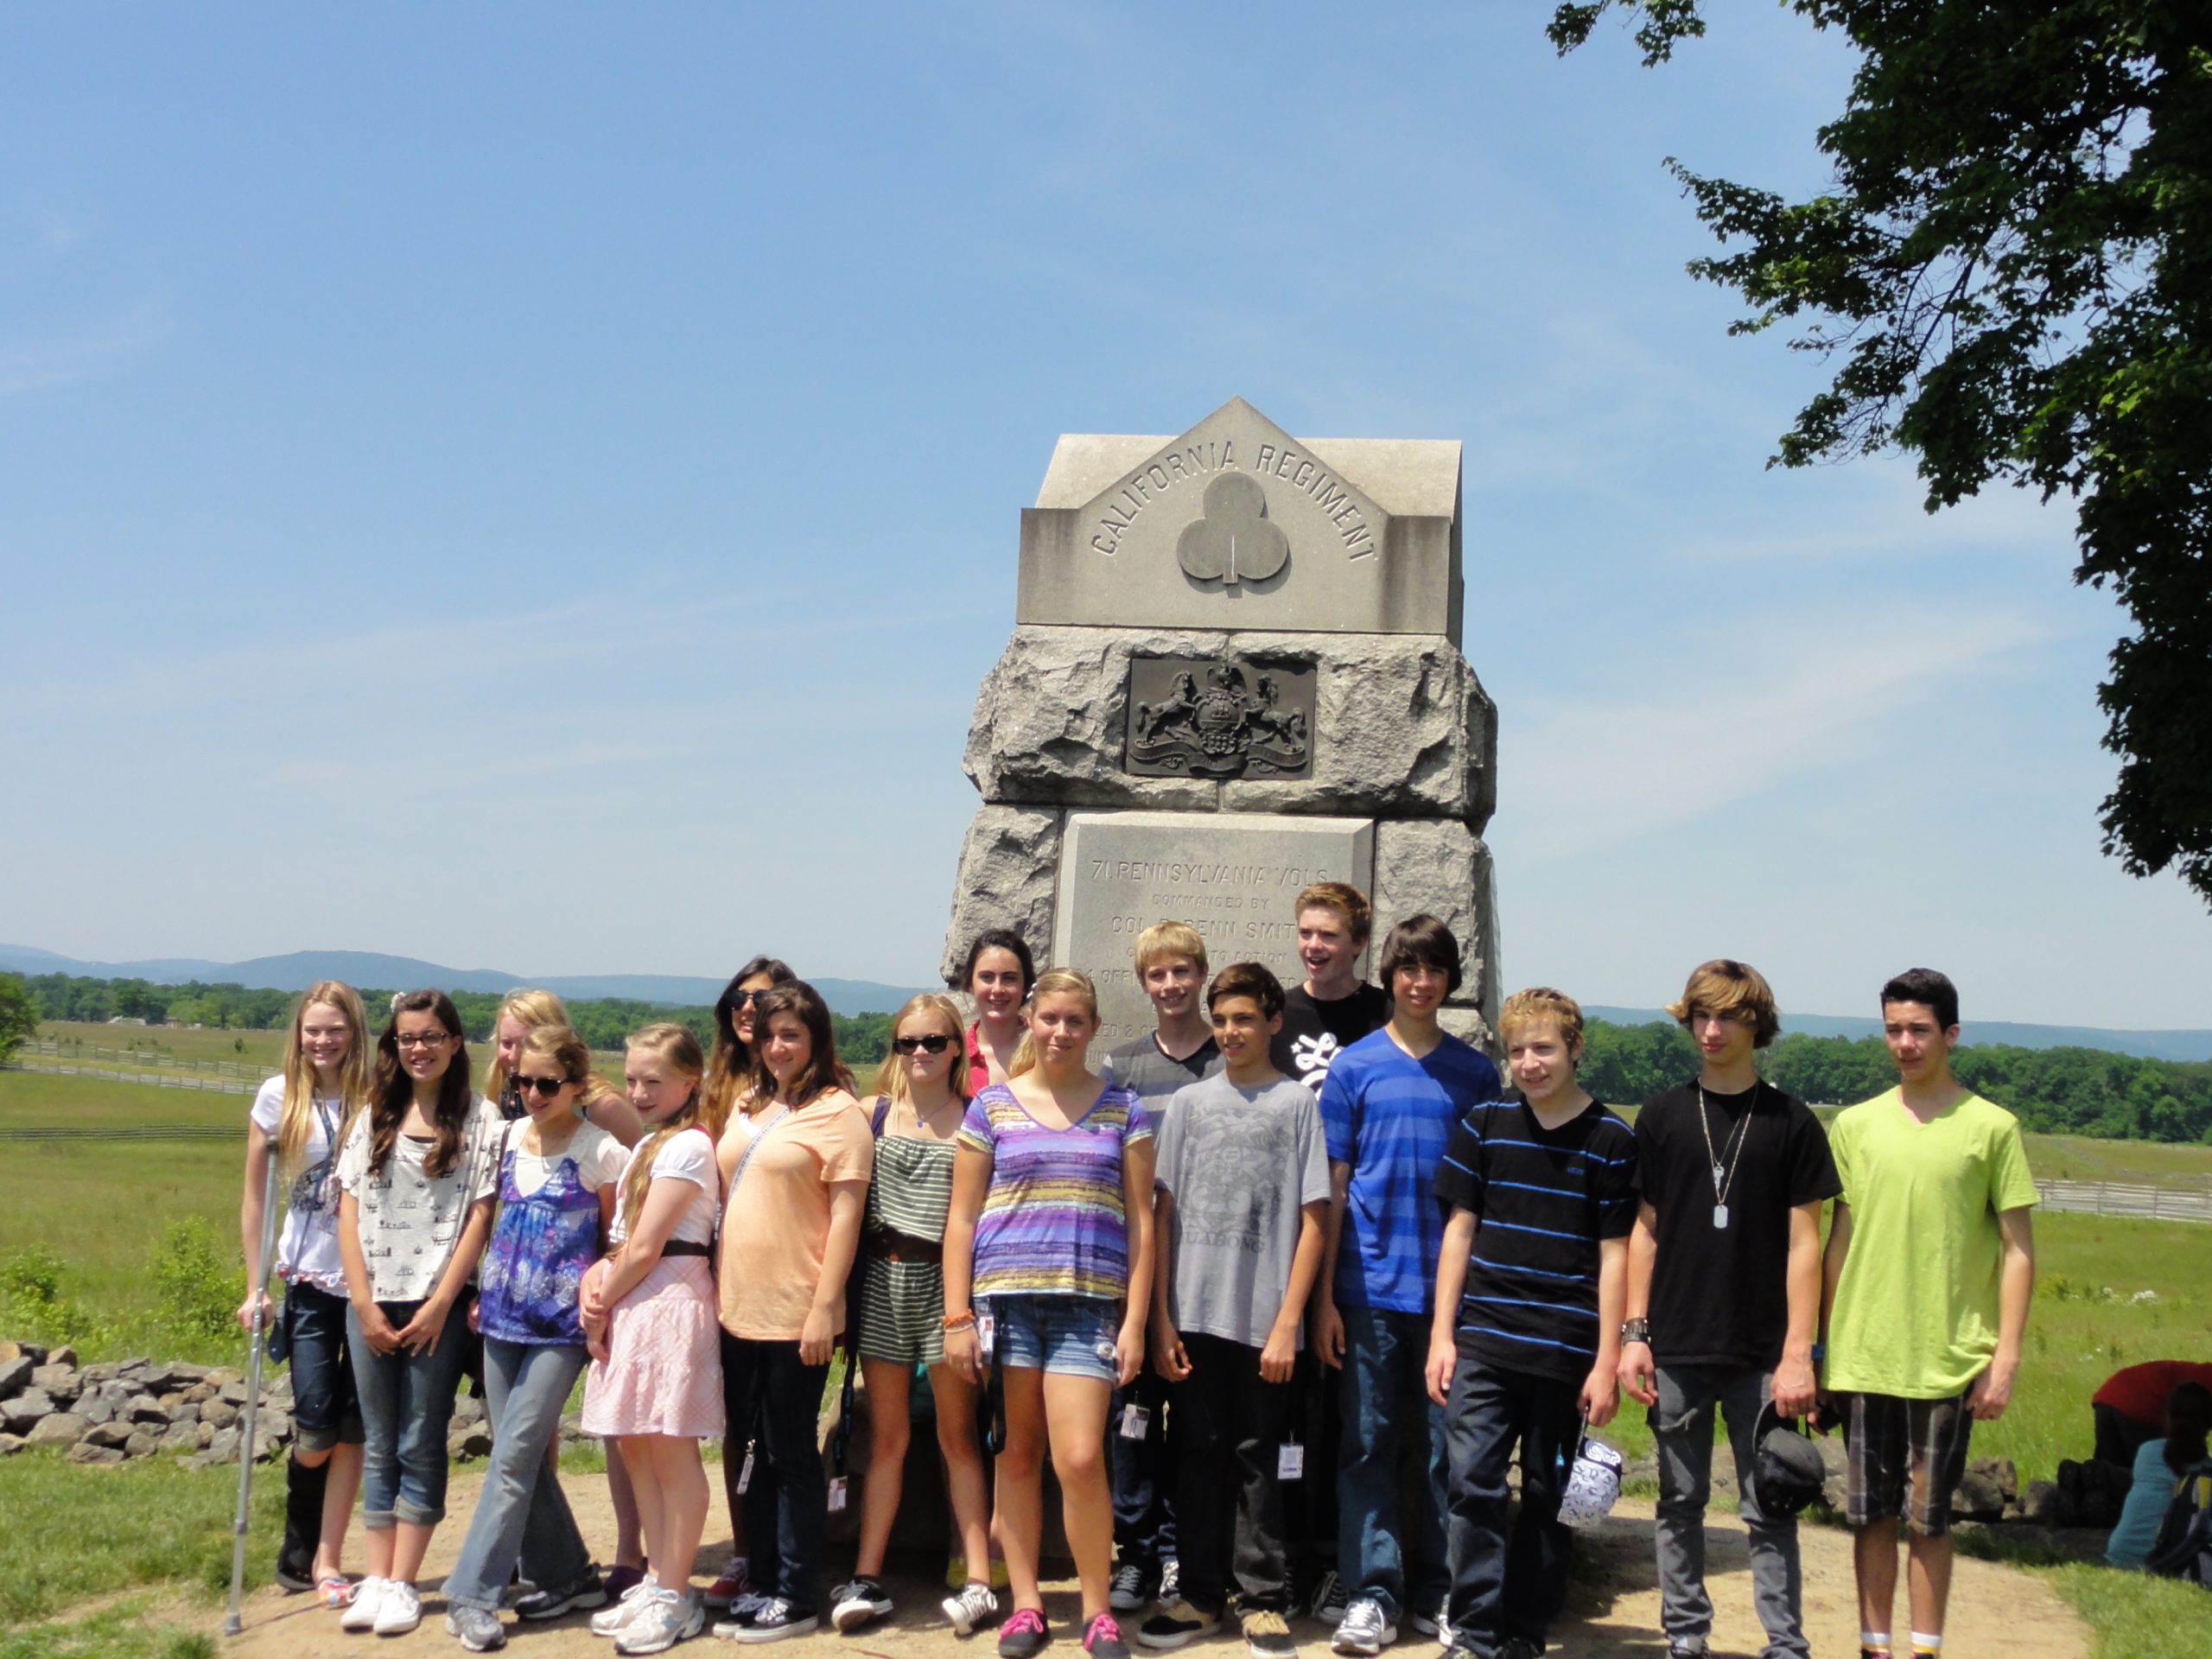 Group of middle school students standing in front of California Regiment monument in field